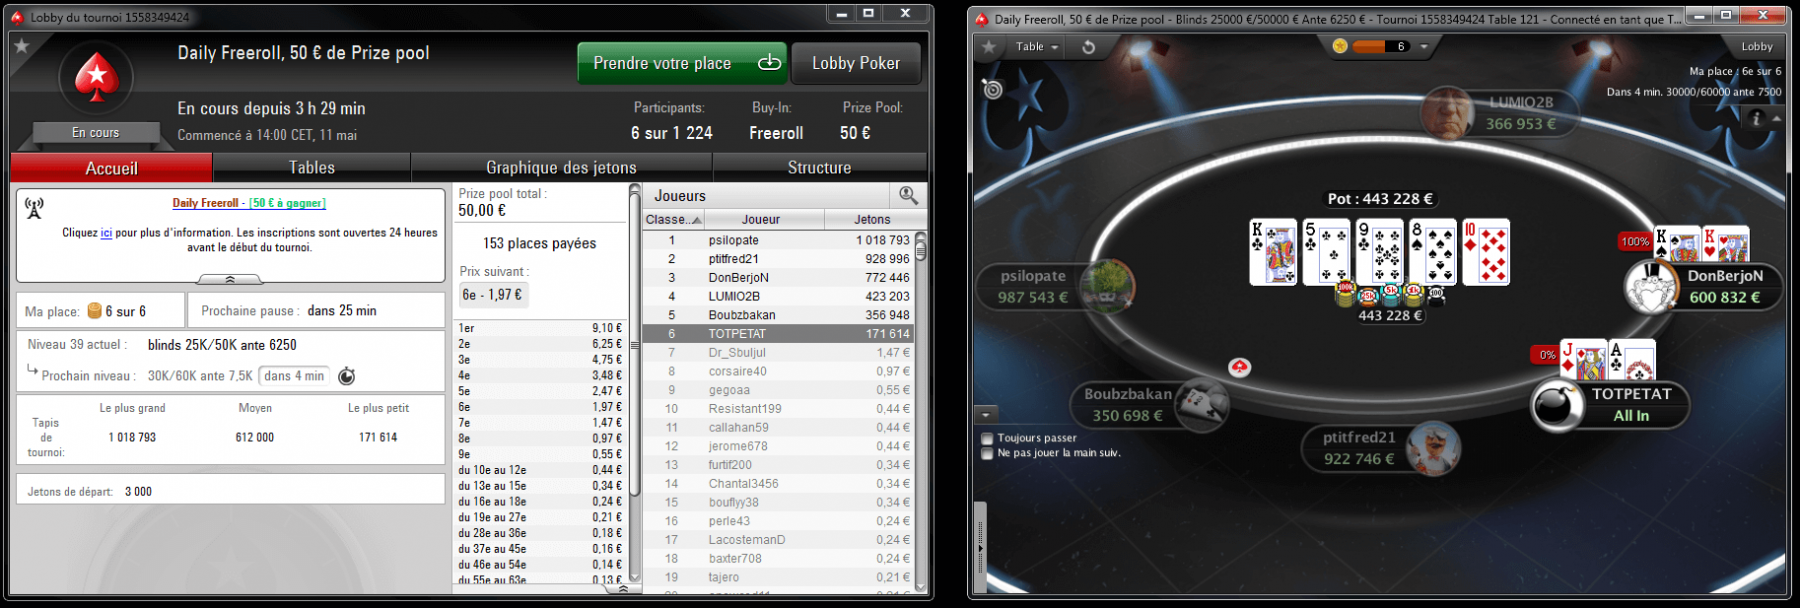 daily_freeroll_11_05.png